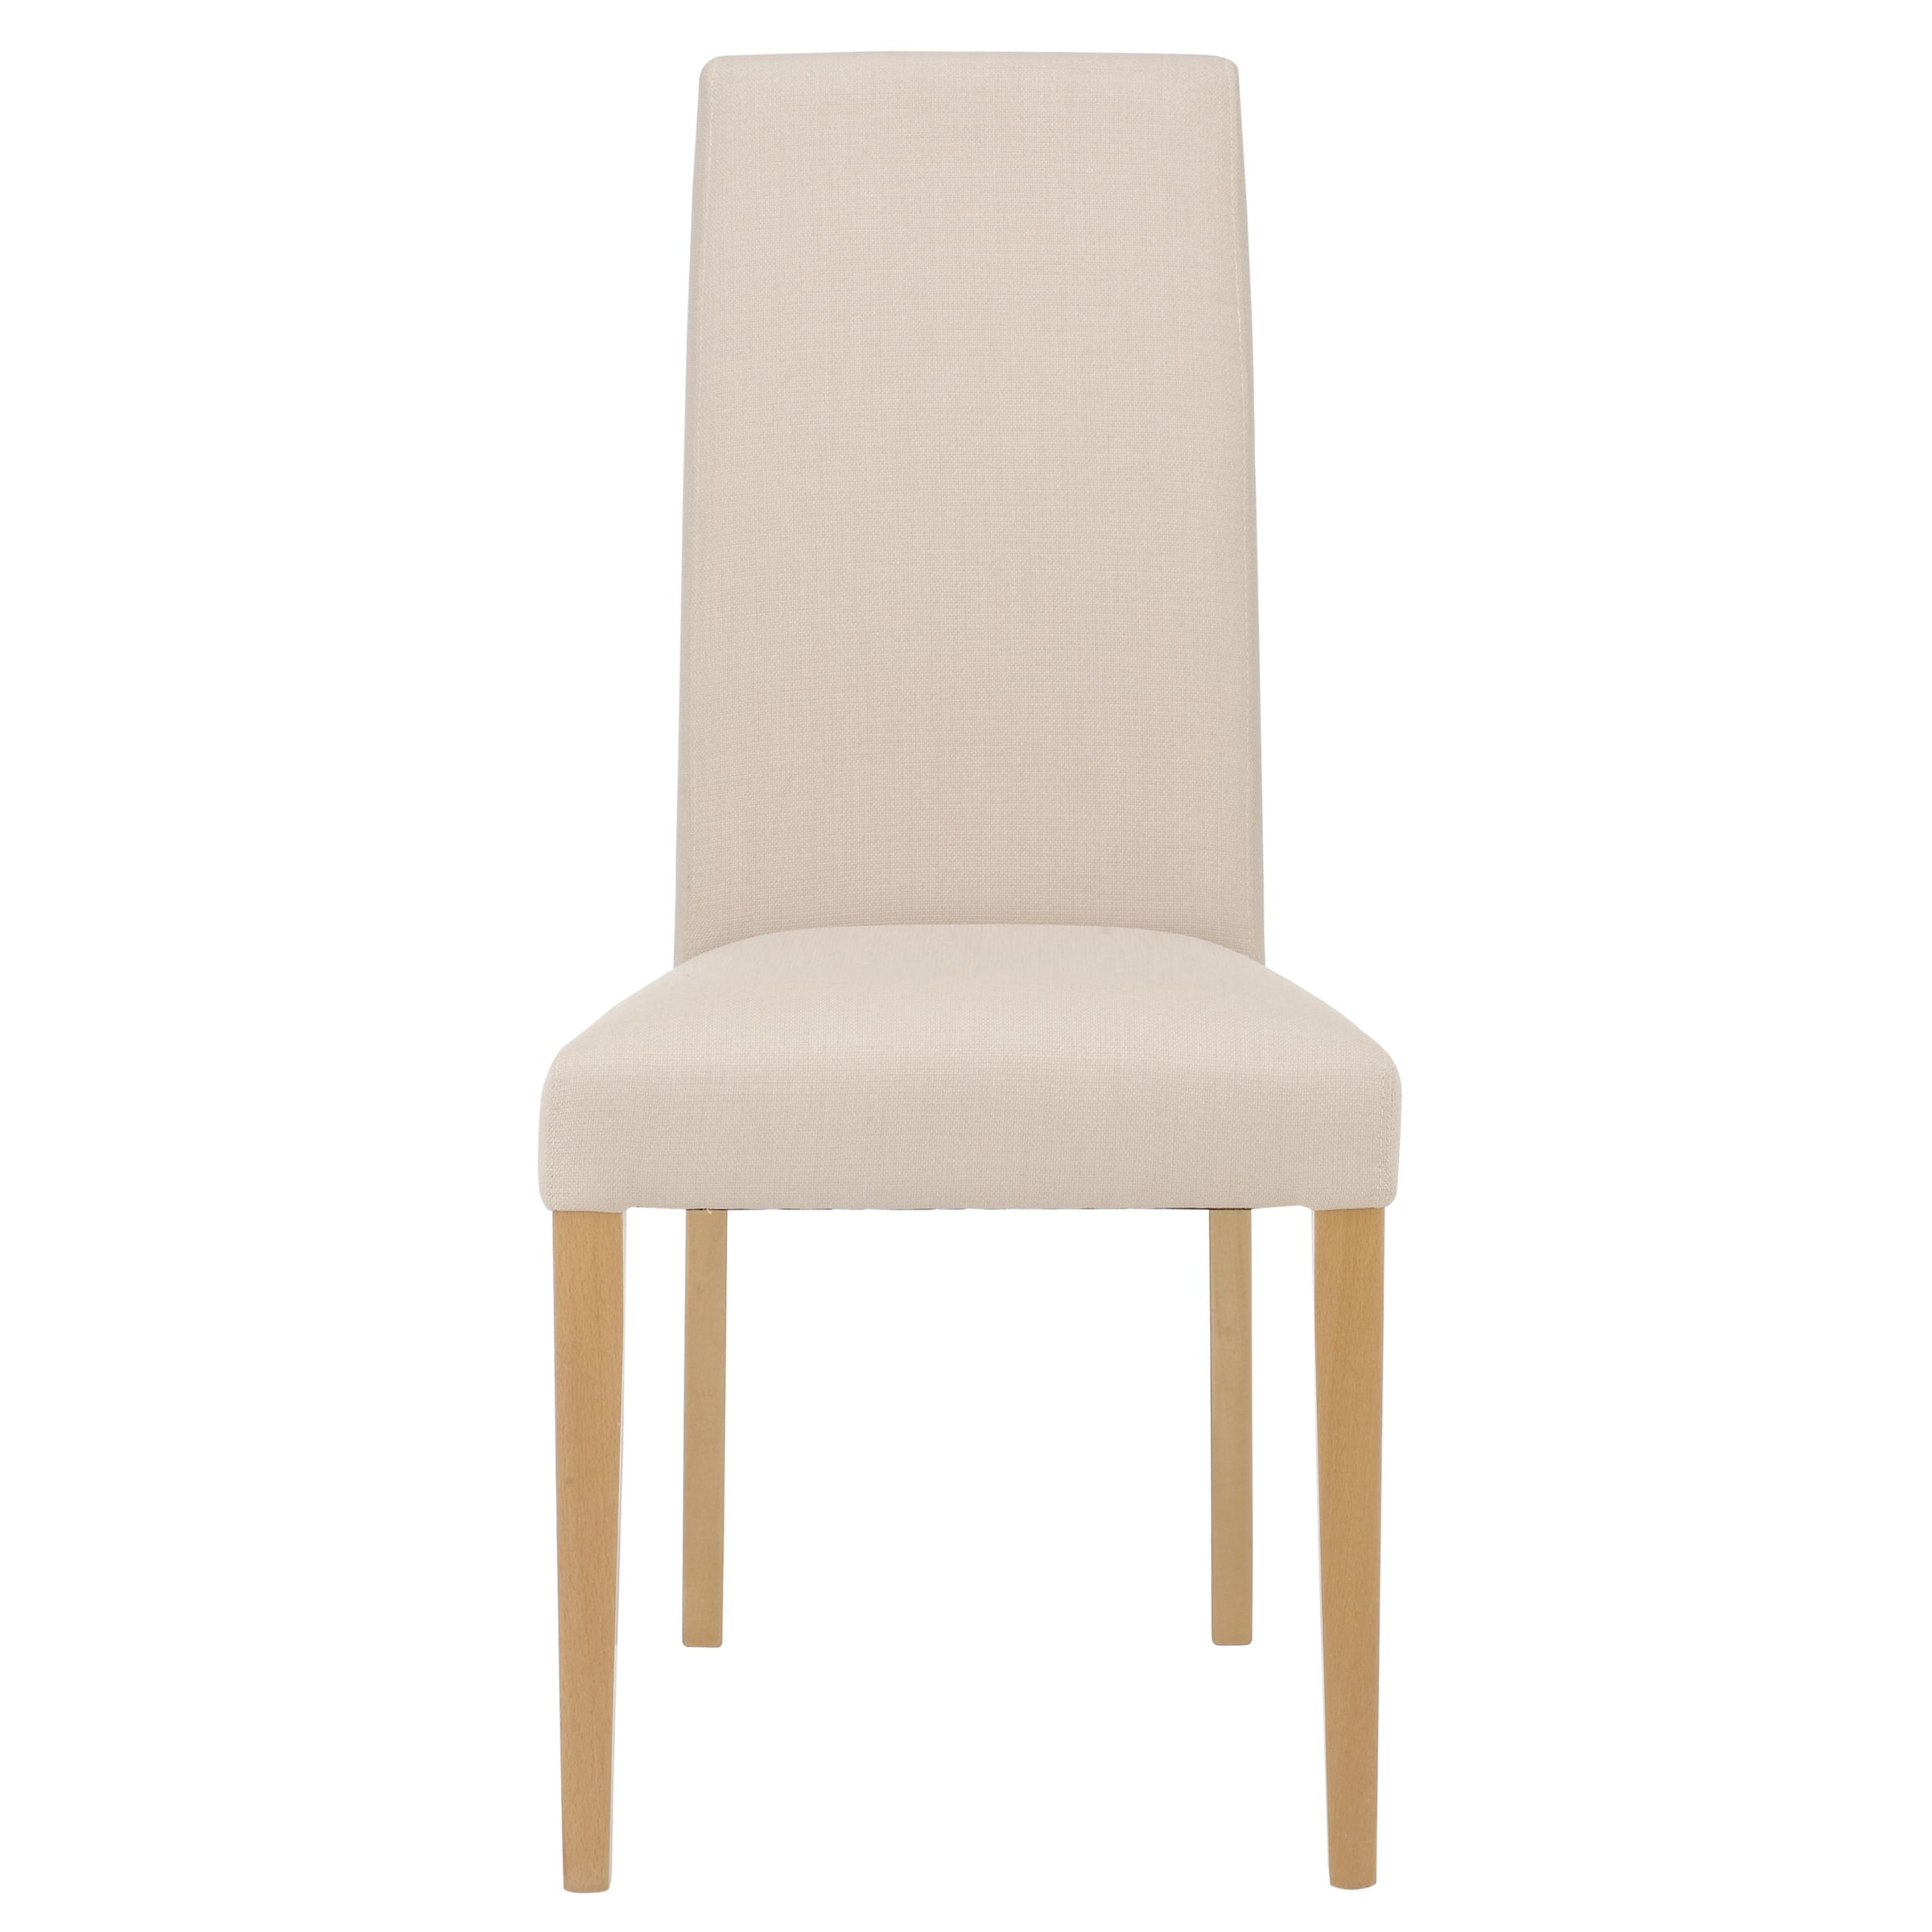 Lydia Natural Fabric Dining Chair, Oak Stained